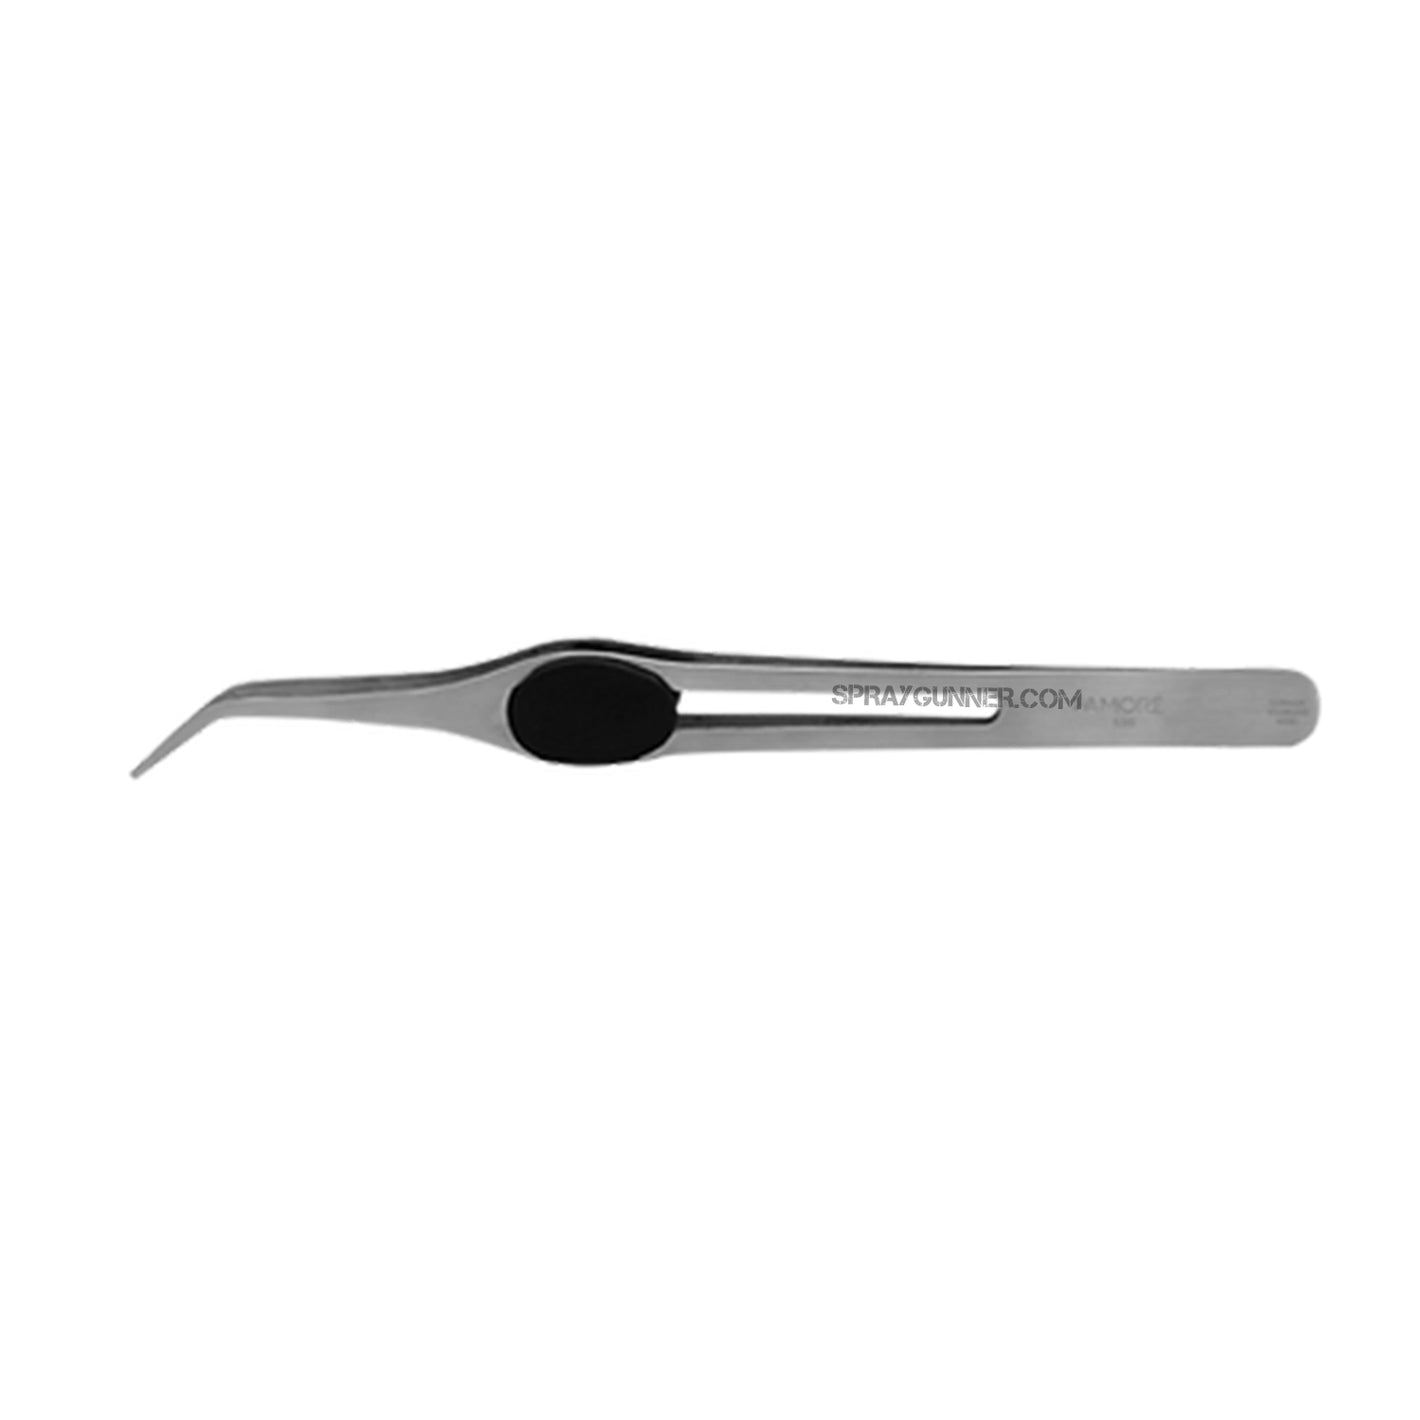 FAMORE Angled Serger Style Tweezers (520)